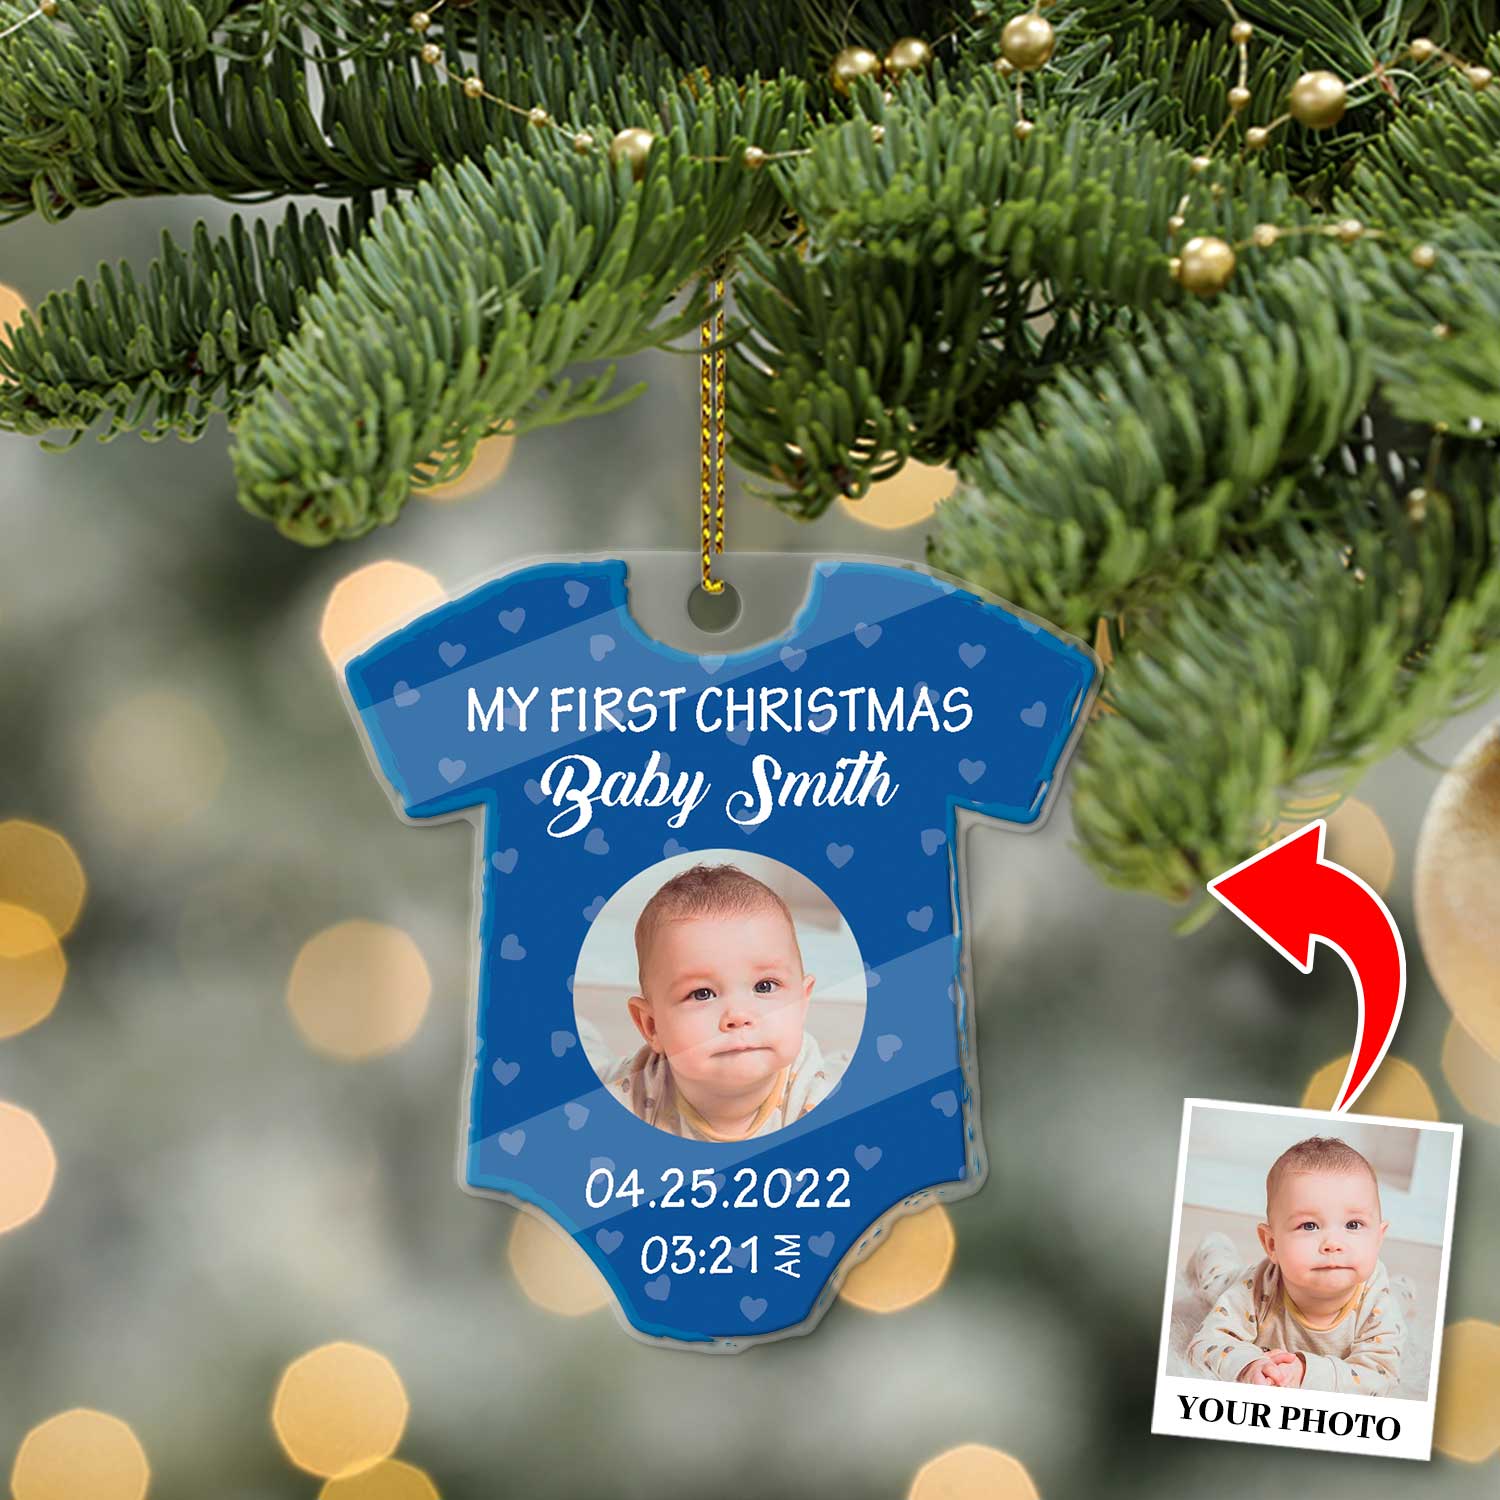 Personalized Name And Text, Ornament For Baby, Baby Boy's First Christmas, Christmas Shirt Ornament, Christmas Shape Ornament 2 Sides